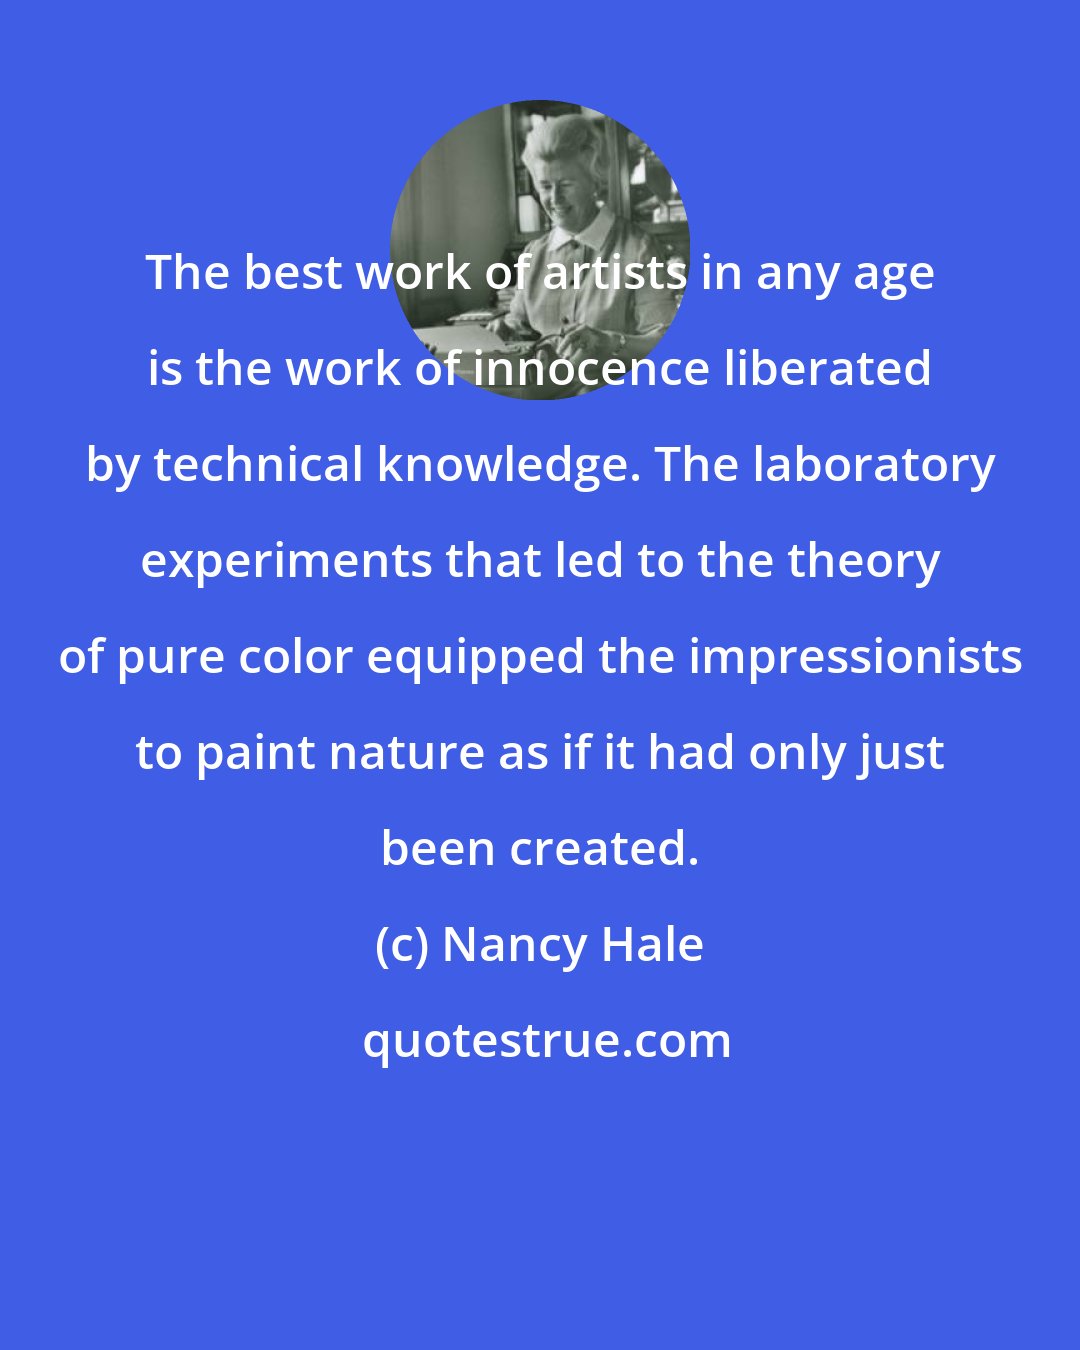 Nancy Hale: The best work of artists in any age is the work of innocence liberated by technical knowledge. The laboratory experiments that led to the theory of pure color equipped the impressionists to paint nature as if it had only just been created.